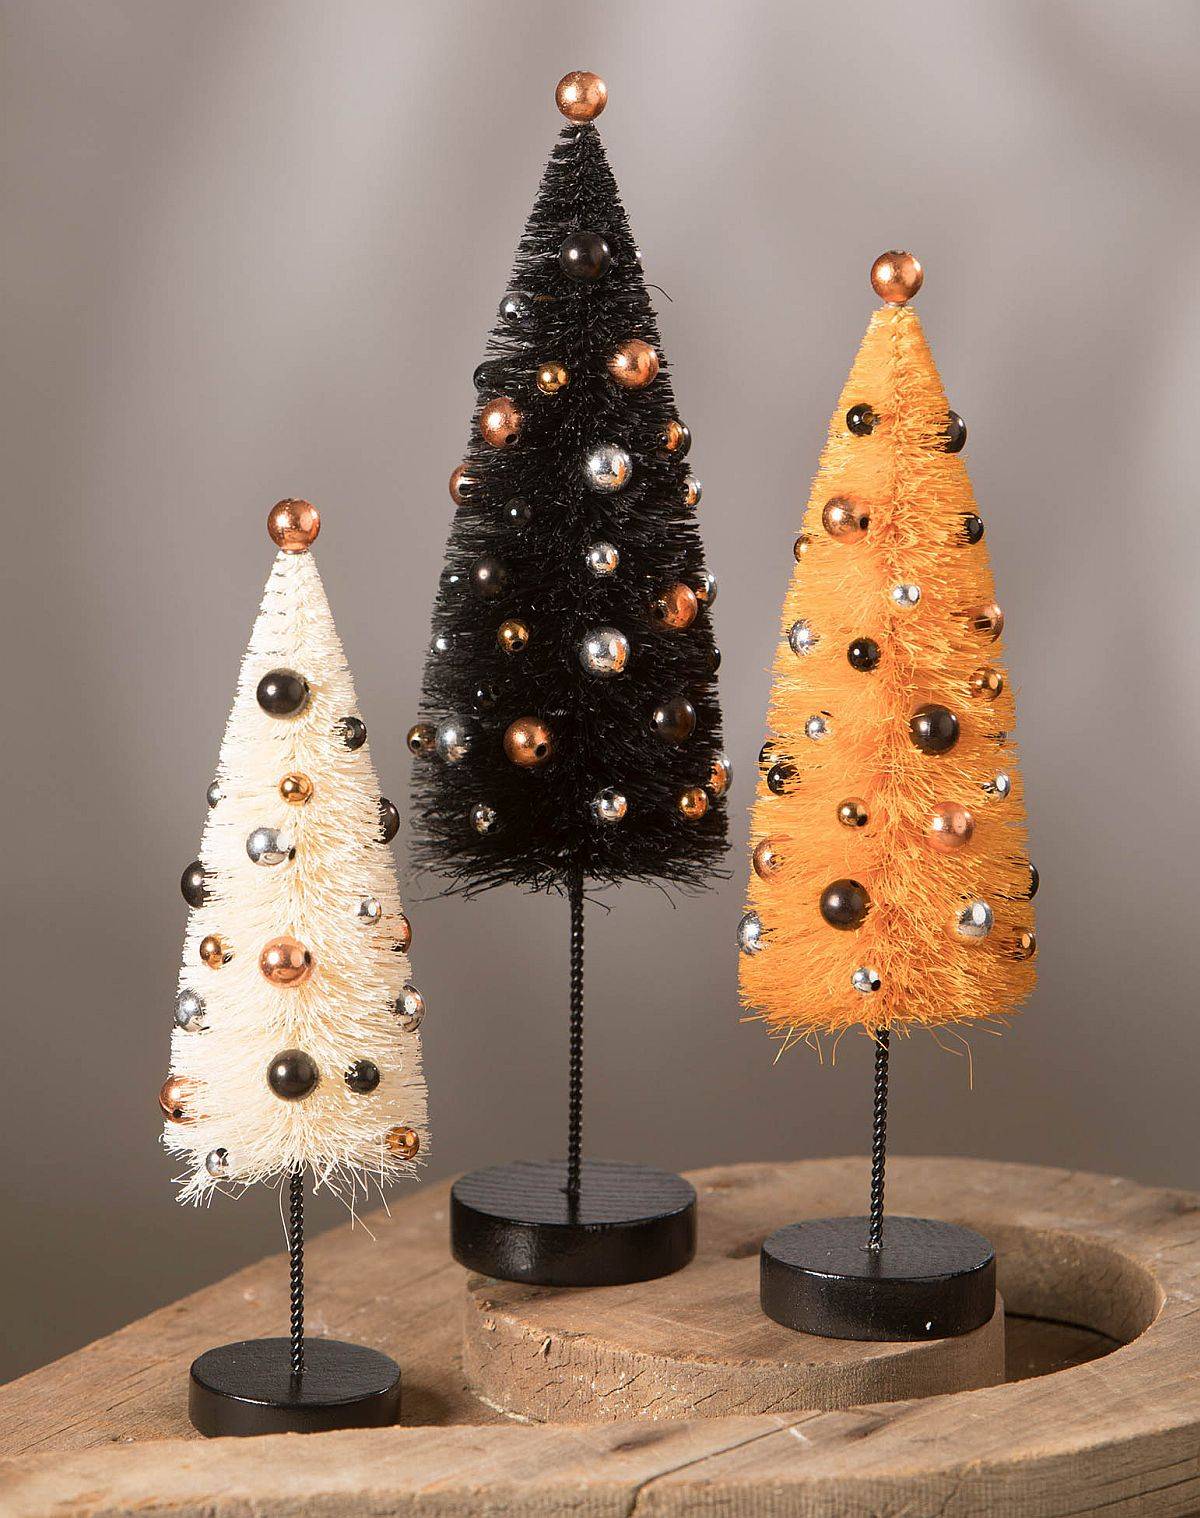 Small-Halloween-trees-crafted-from-bottle-brushes-are-great-for-the-minimal-Halloween-table-11839